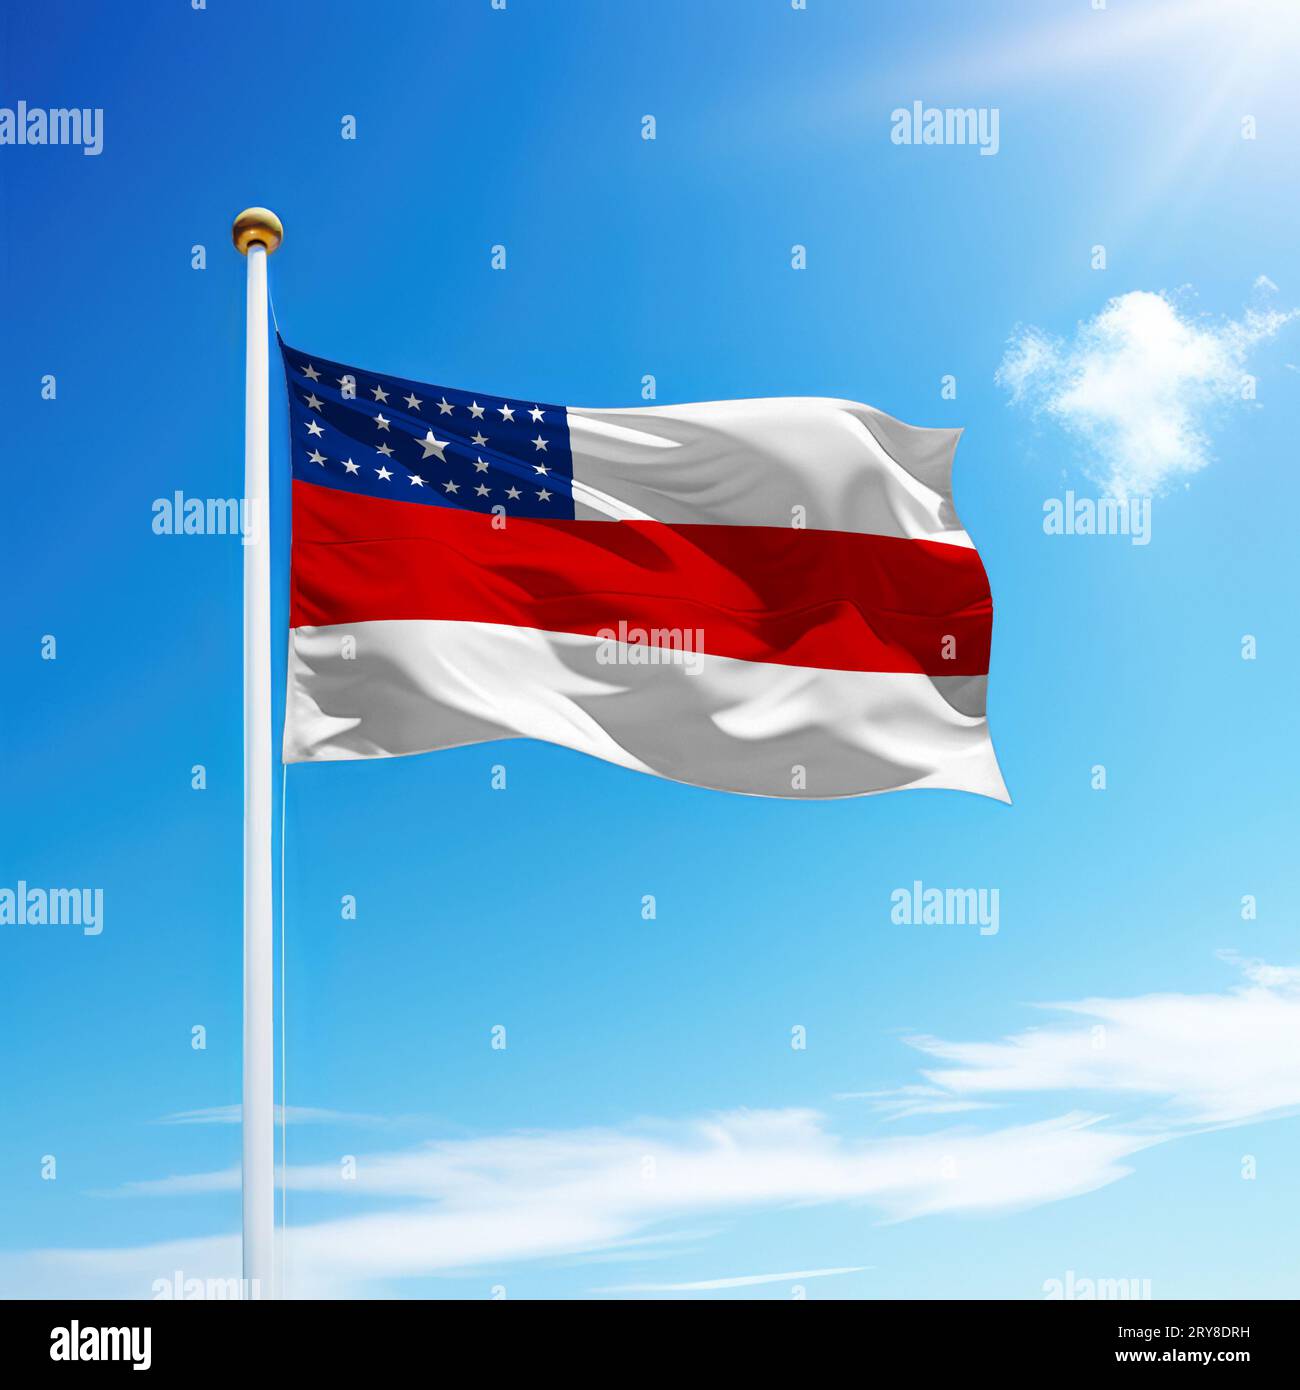 Waving flag of Amazonas is a state of Brazil on flagpole with sky background. Stock Photo